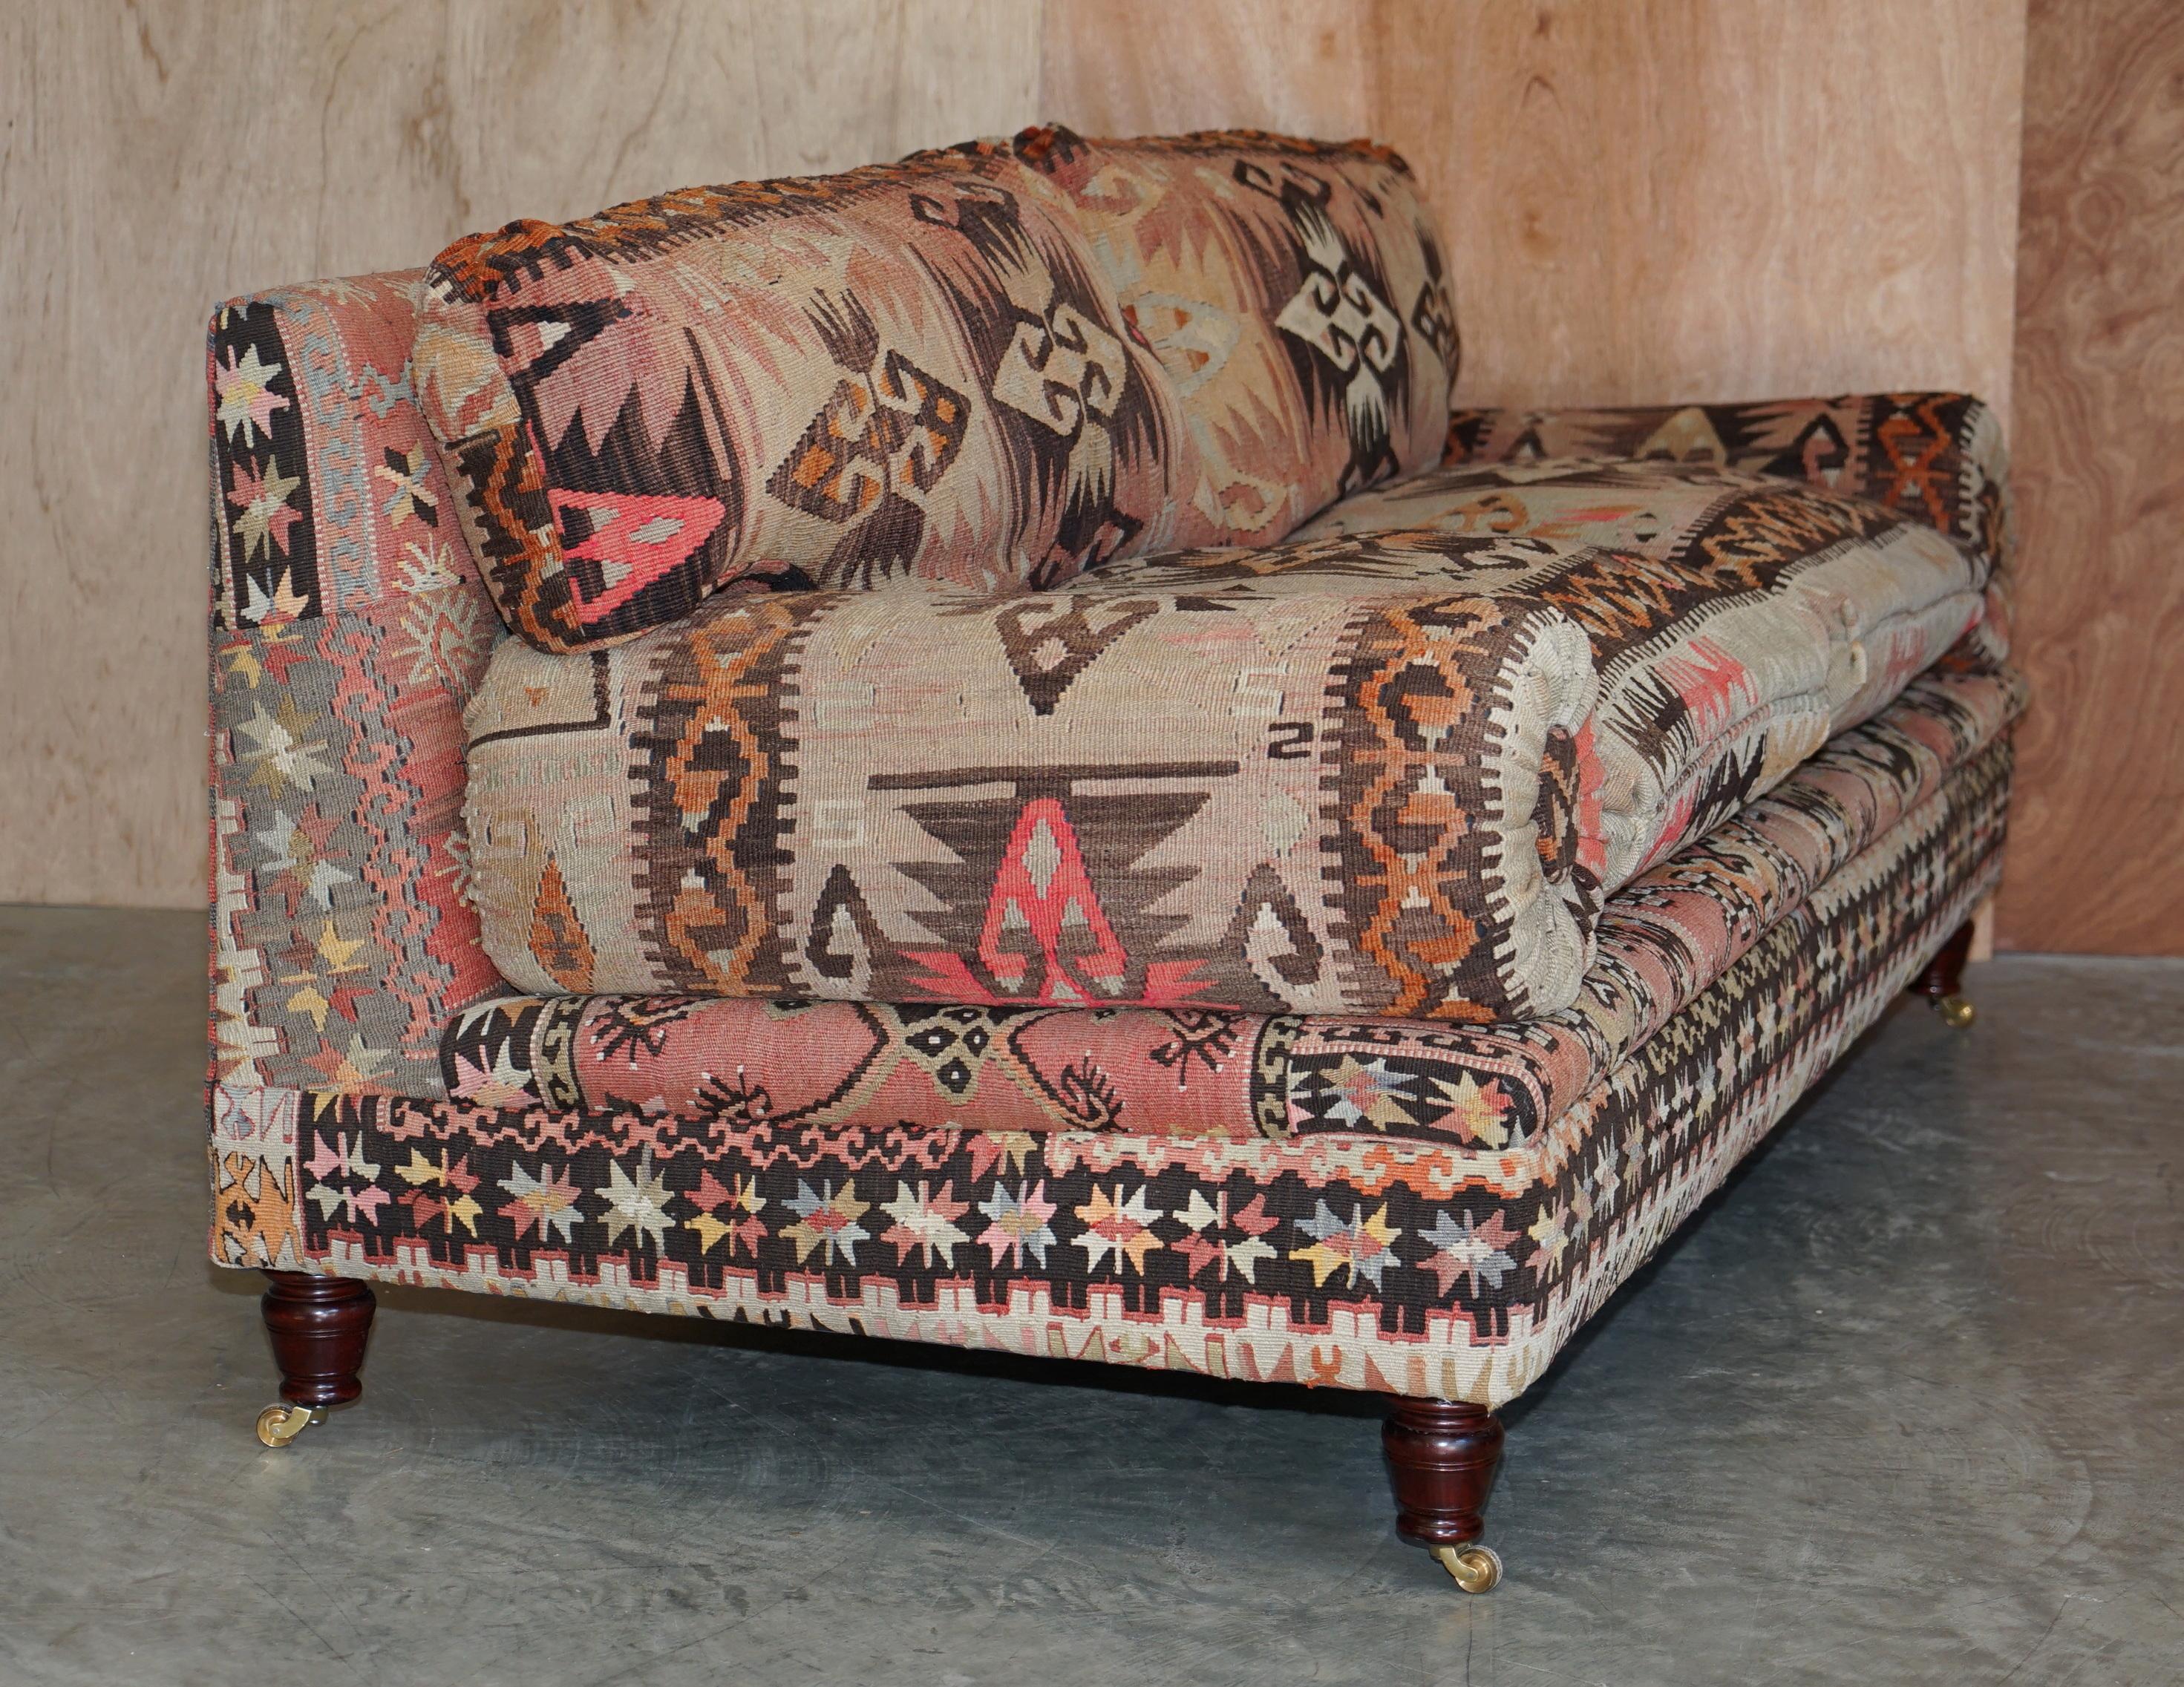 Rare New Old Stock George Smith Bulster Arm Kilim Upholstered Sofa Part of Suite 2